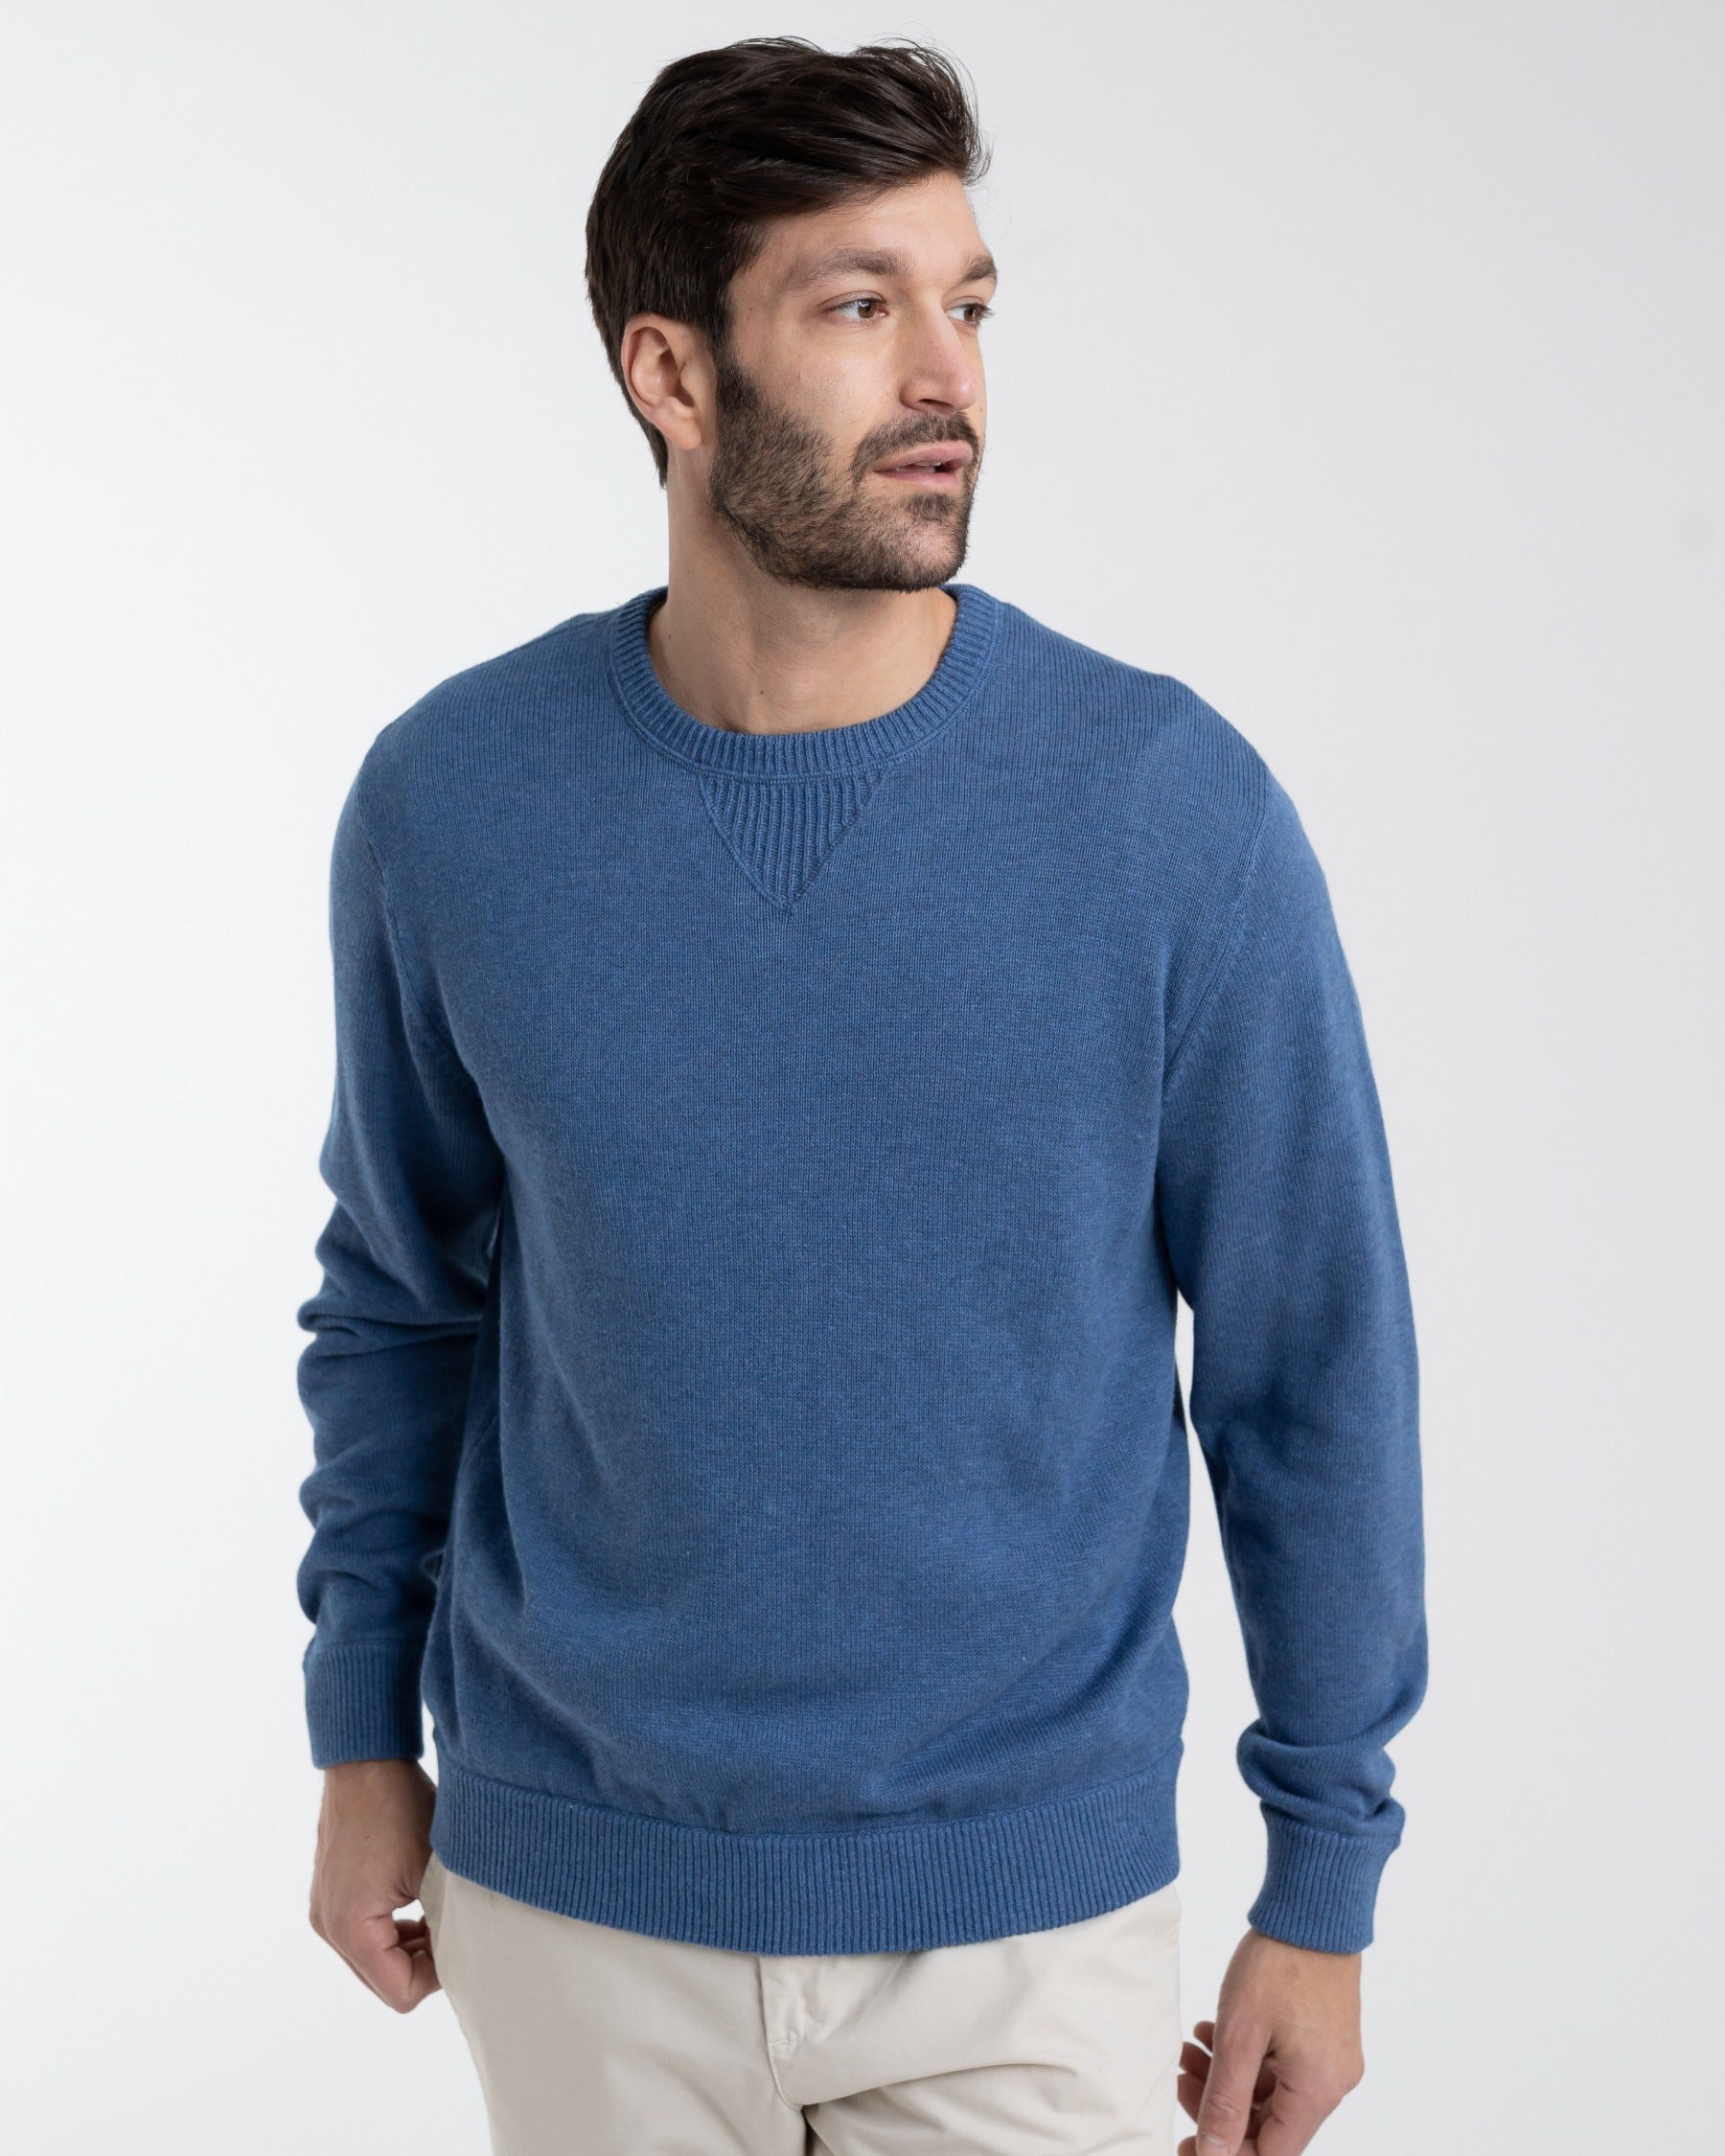 Cotton Cashmere Blend Weekend Sweatshirt Sweater (Choice of Colors) by Alashan Cashmere